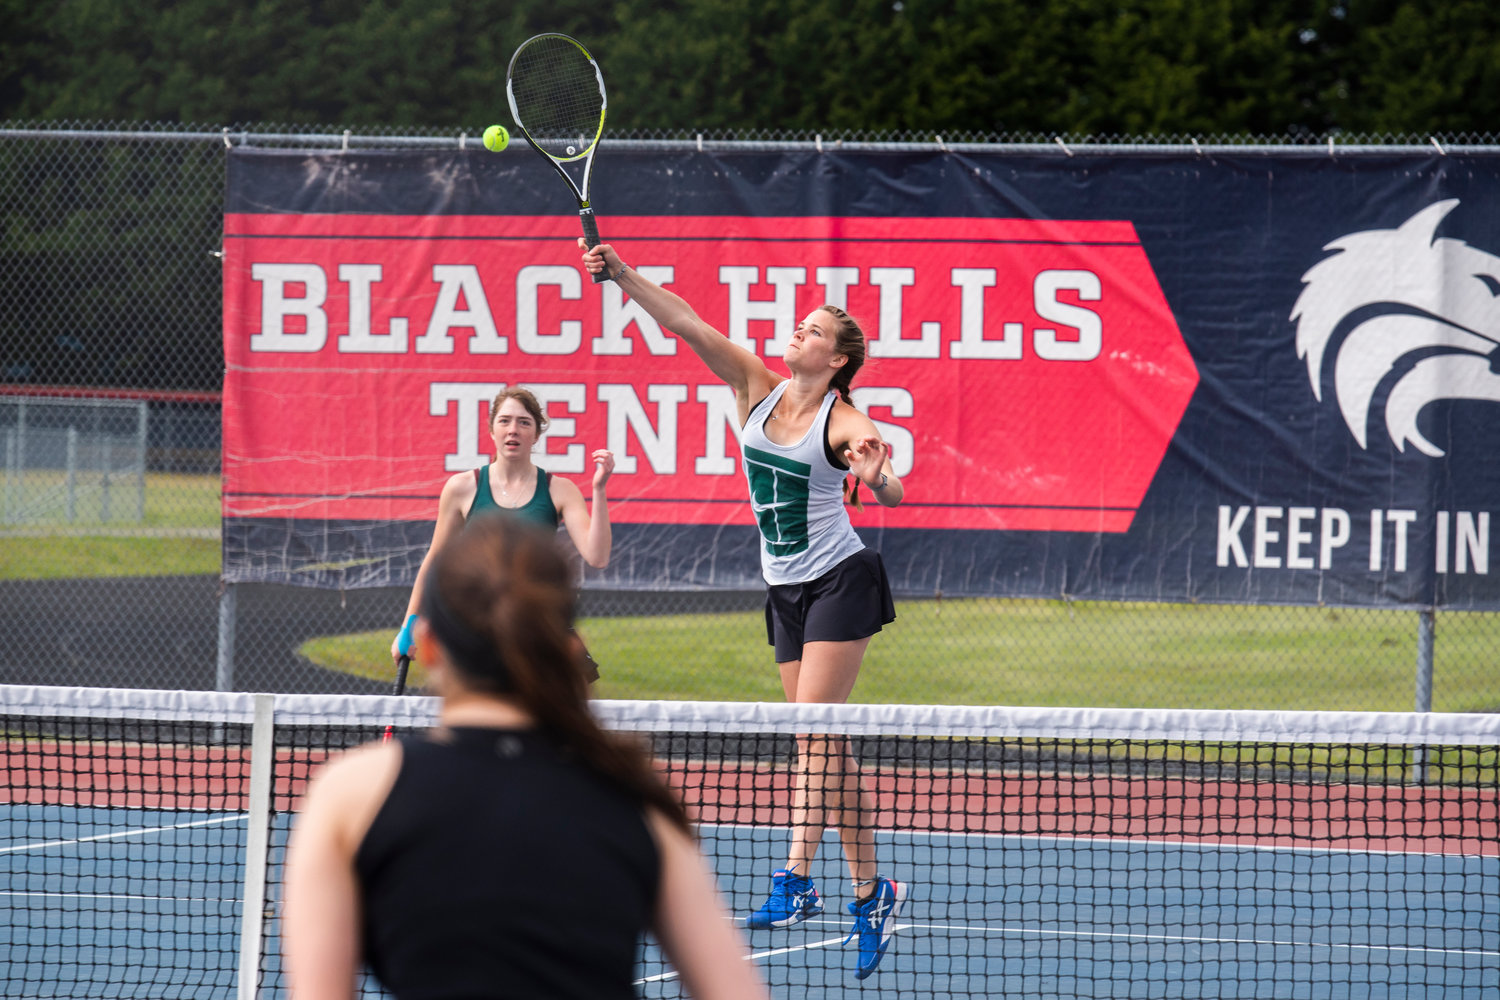 Centralia’s Maddie Corwin goes up for the ball alongside her partner Liza Hopkins during a doubles match at A.G. West Black Hills High School Tuesday afternoon in Tumwater.